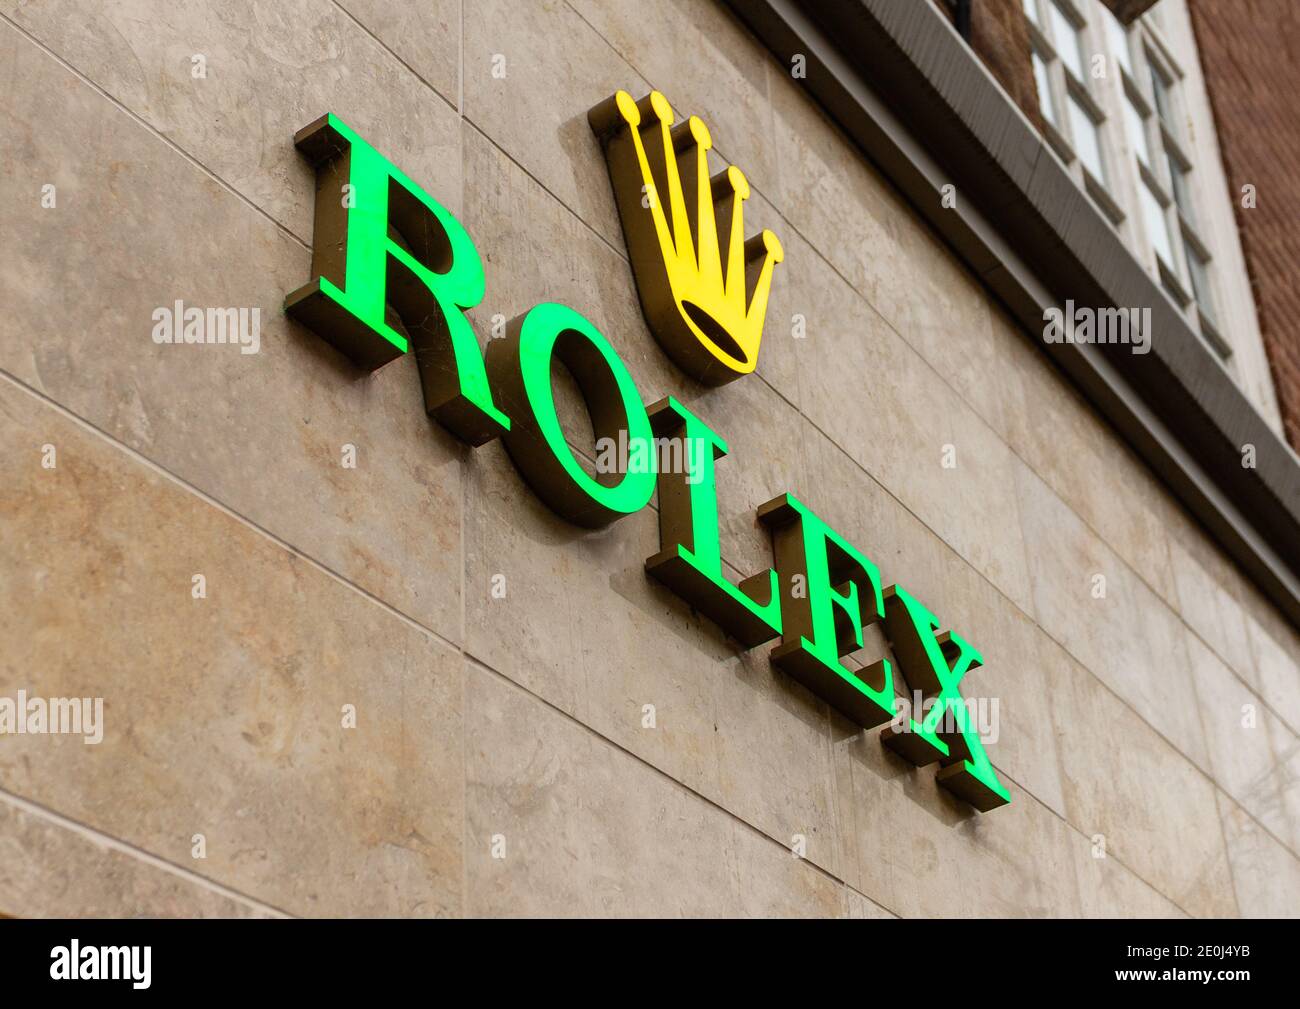 Rolex watch shop with Rolex sign prominently displayed. Stock Photo